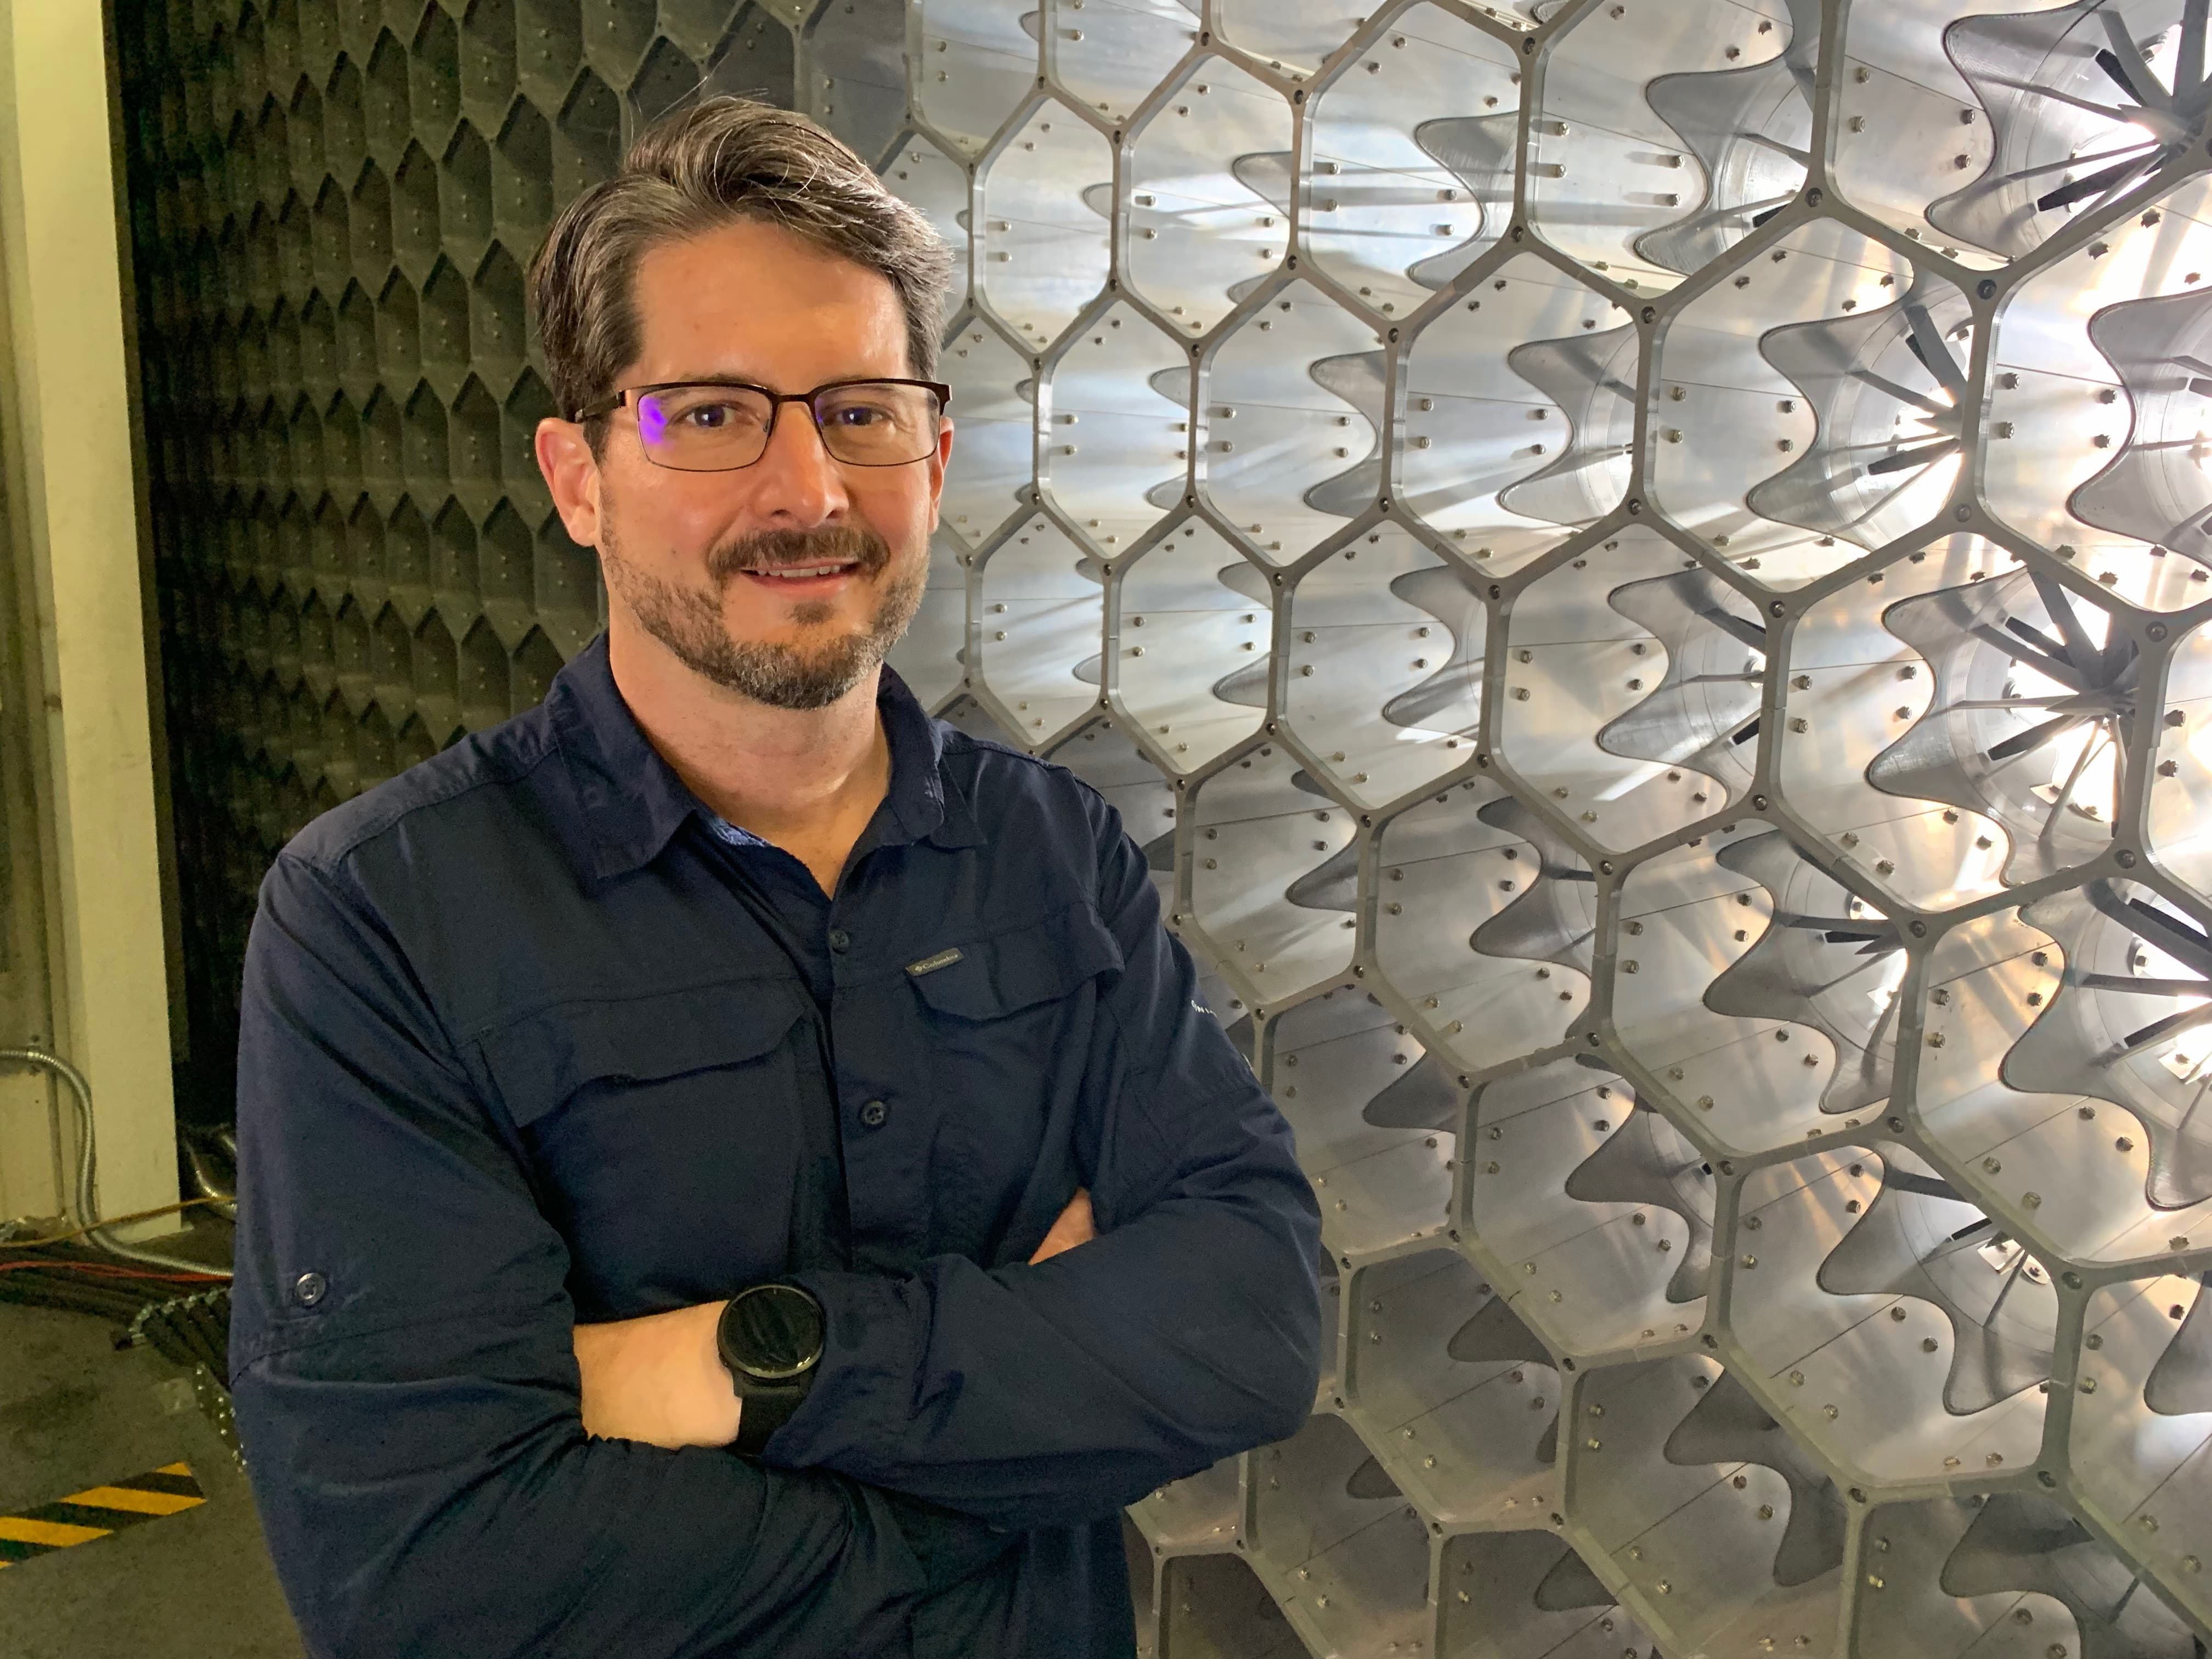 Forest Masters stands in front of honeycomb structured cells designed to capture wind speed